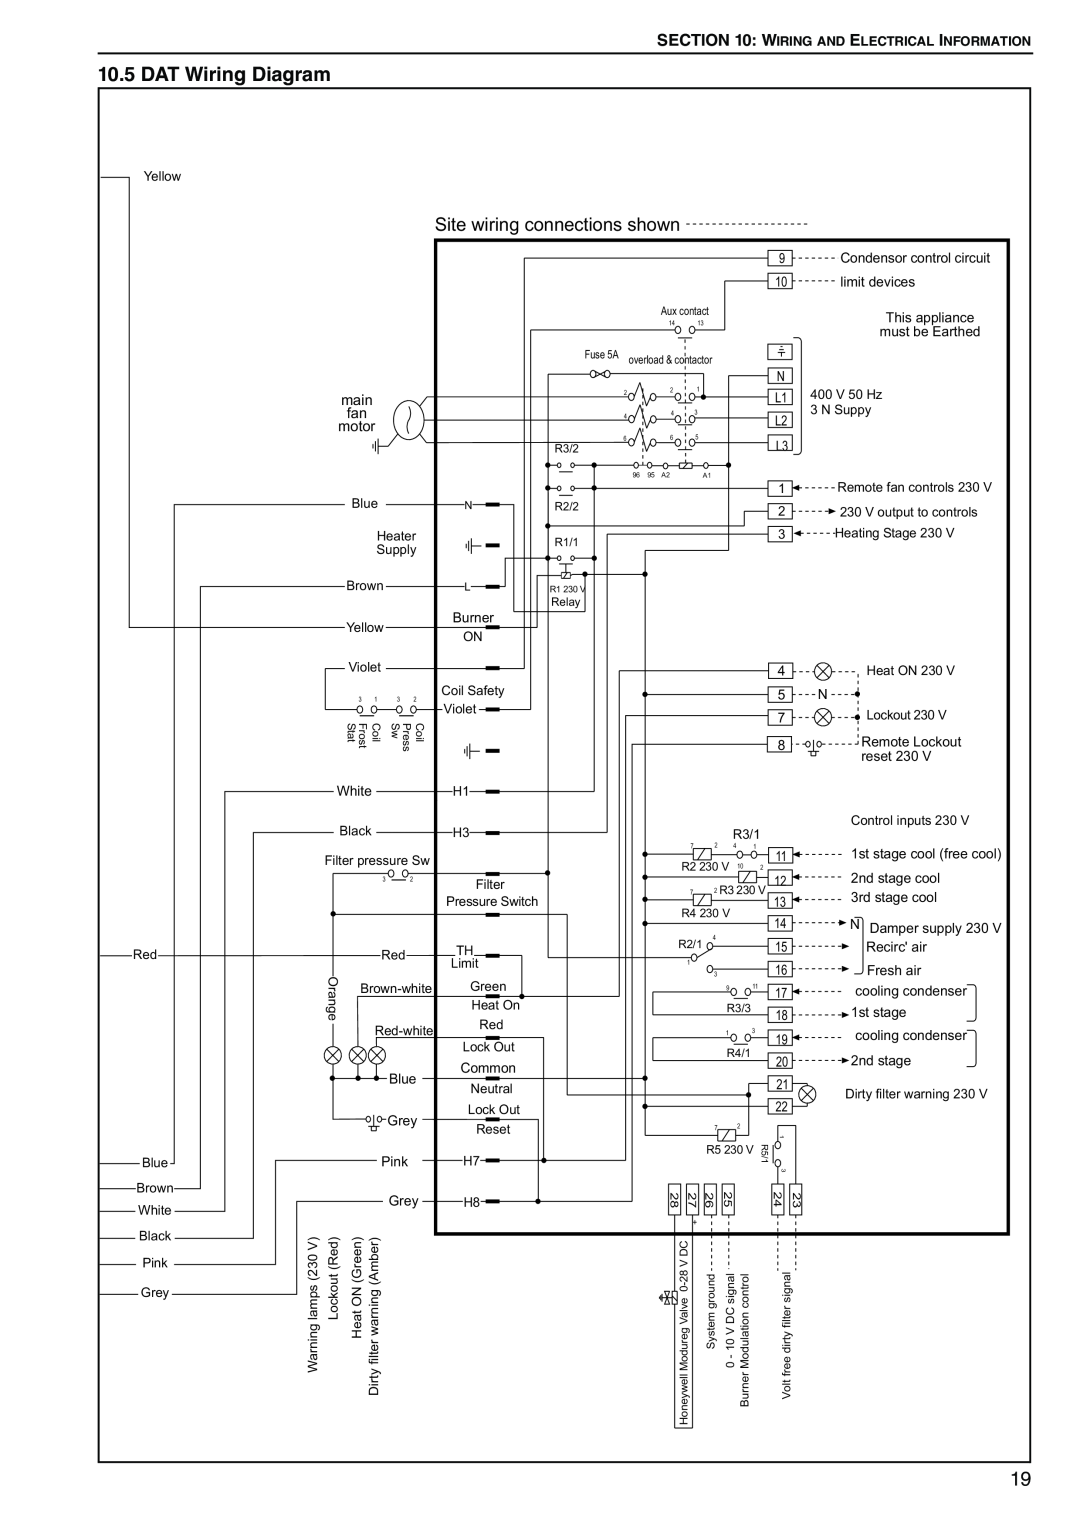 Roberts Gorden DAT90, DAT75, DAT100 DAT Wiring Diagram, Site wiring connections shown, Wiring And Electrical Information 